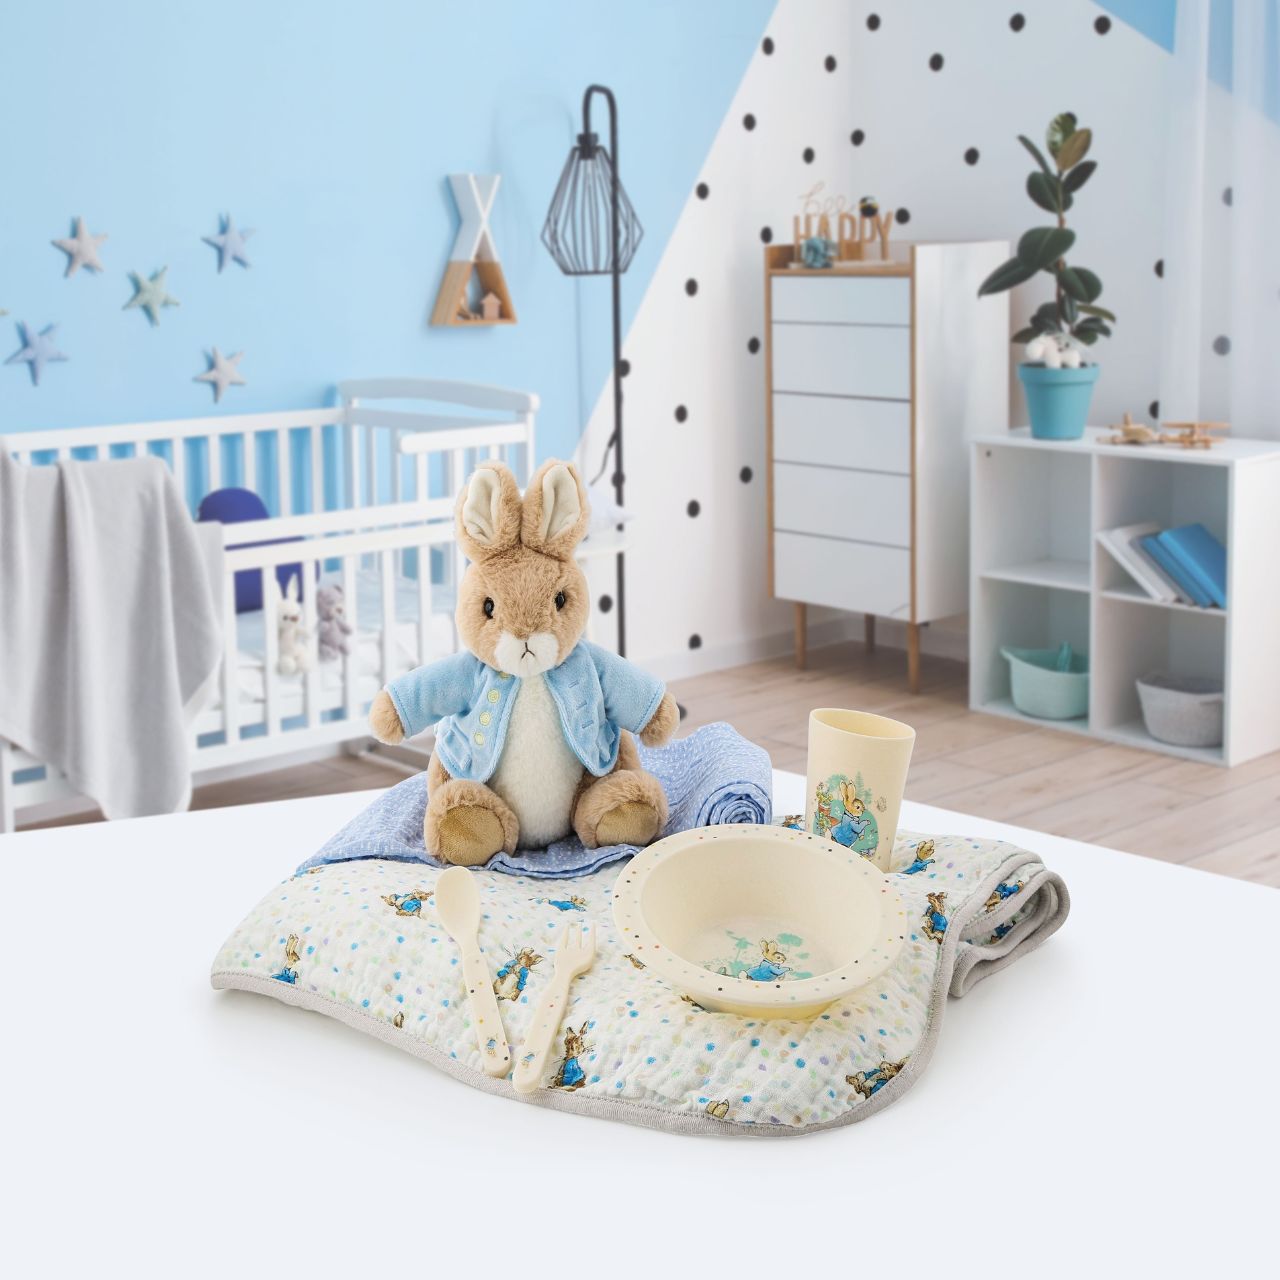 Beatrix Potter Peter Rabbit Large This Peter Rabbit soft toy is made from beautifully soft fabric and is dressed in clothing exactly as illustrated by Beatrix Potter, with his signature blue jacket. The Peter Rabbit collection features the much loved characters from the Beatrix Potter books and this quality and authentic soft toy is sure to be adored for many years to come.